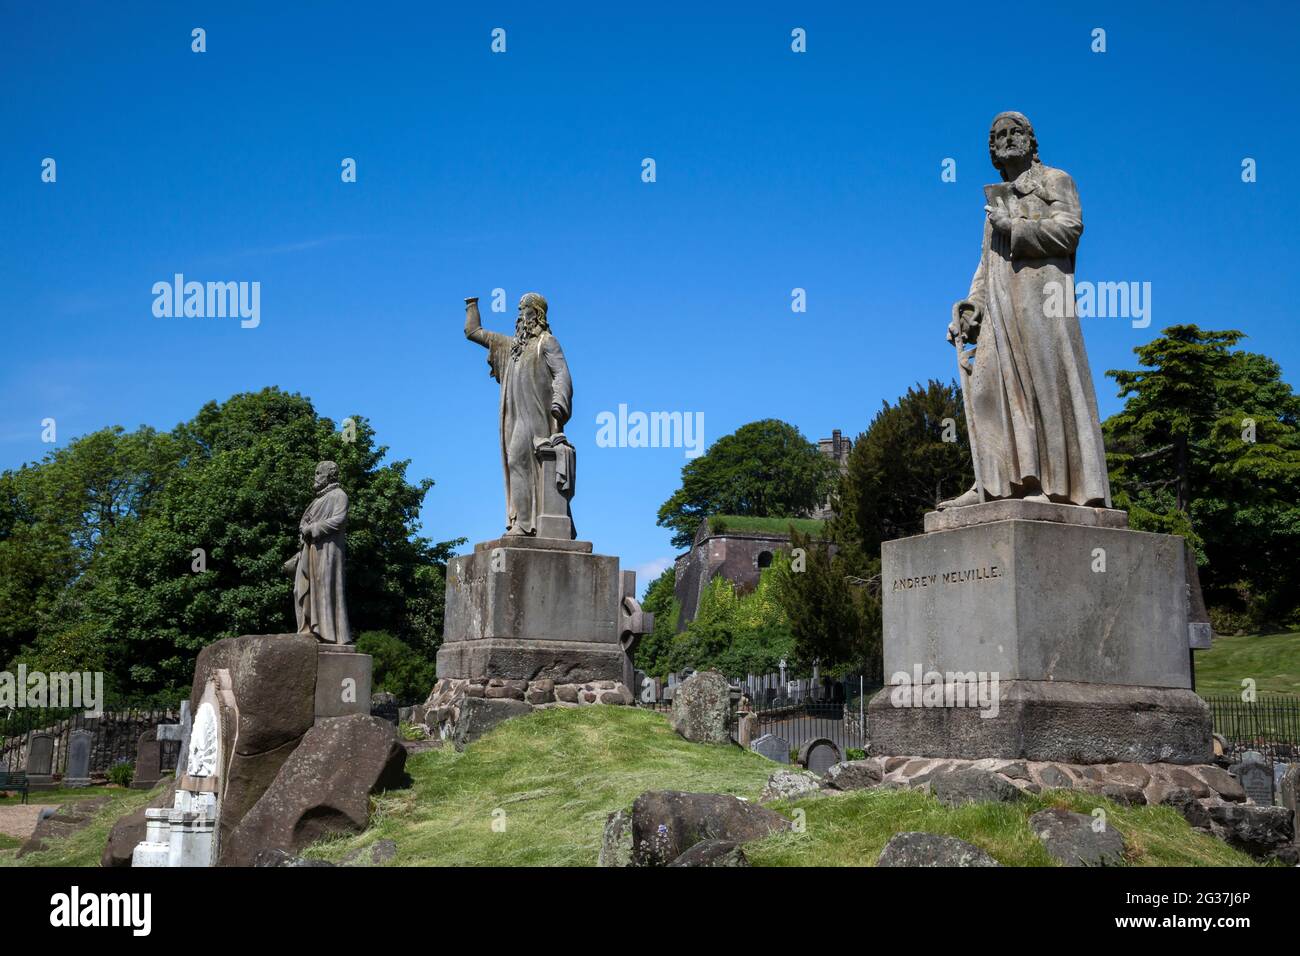 The Reformer Statues in the Old Town Cemetery, Stirling, Scotland are of Alexander Henderson (left) Scottish theologian and important ecclesiastical s Stock Photo